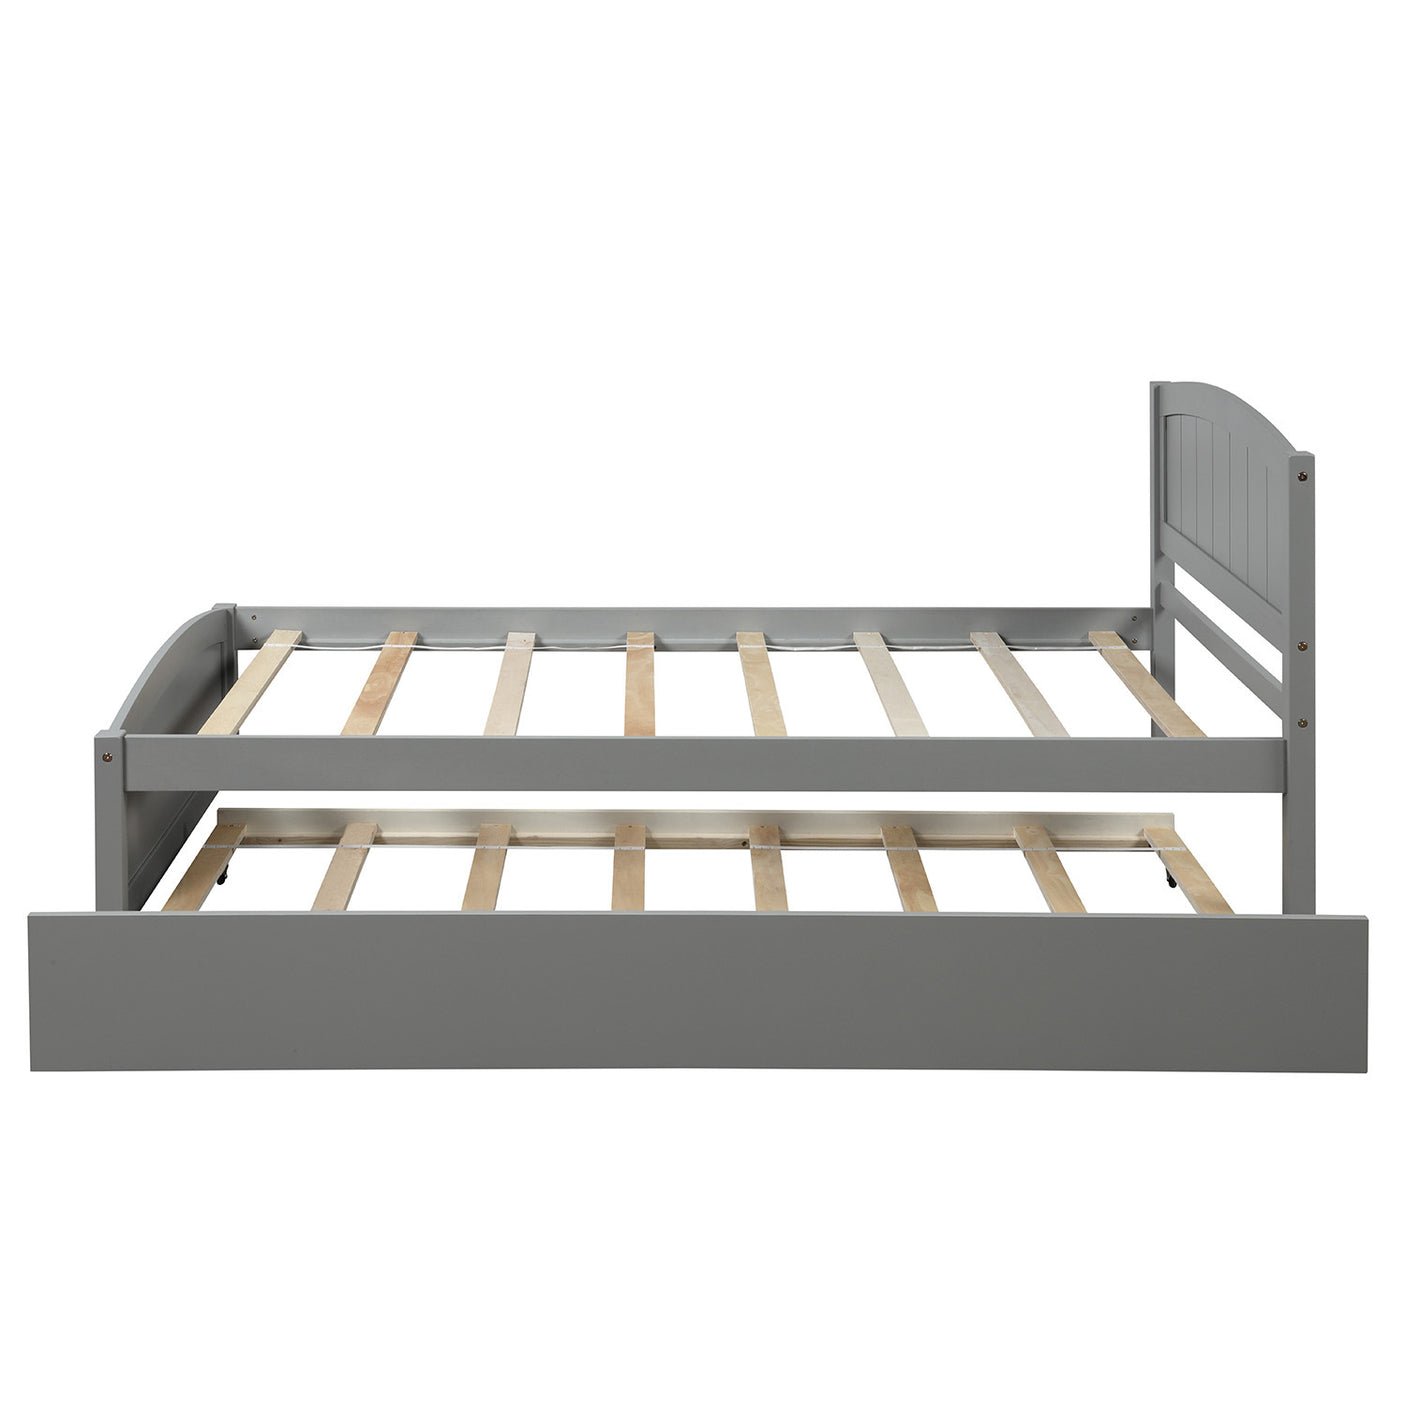 Twin size Platform Bed with Trundle, Gray - Home Elegance USA